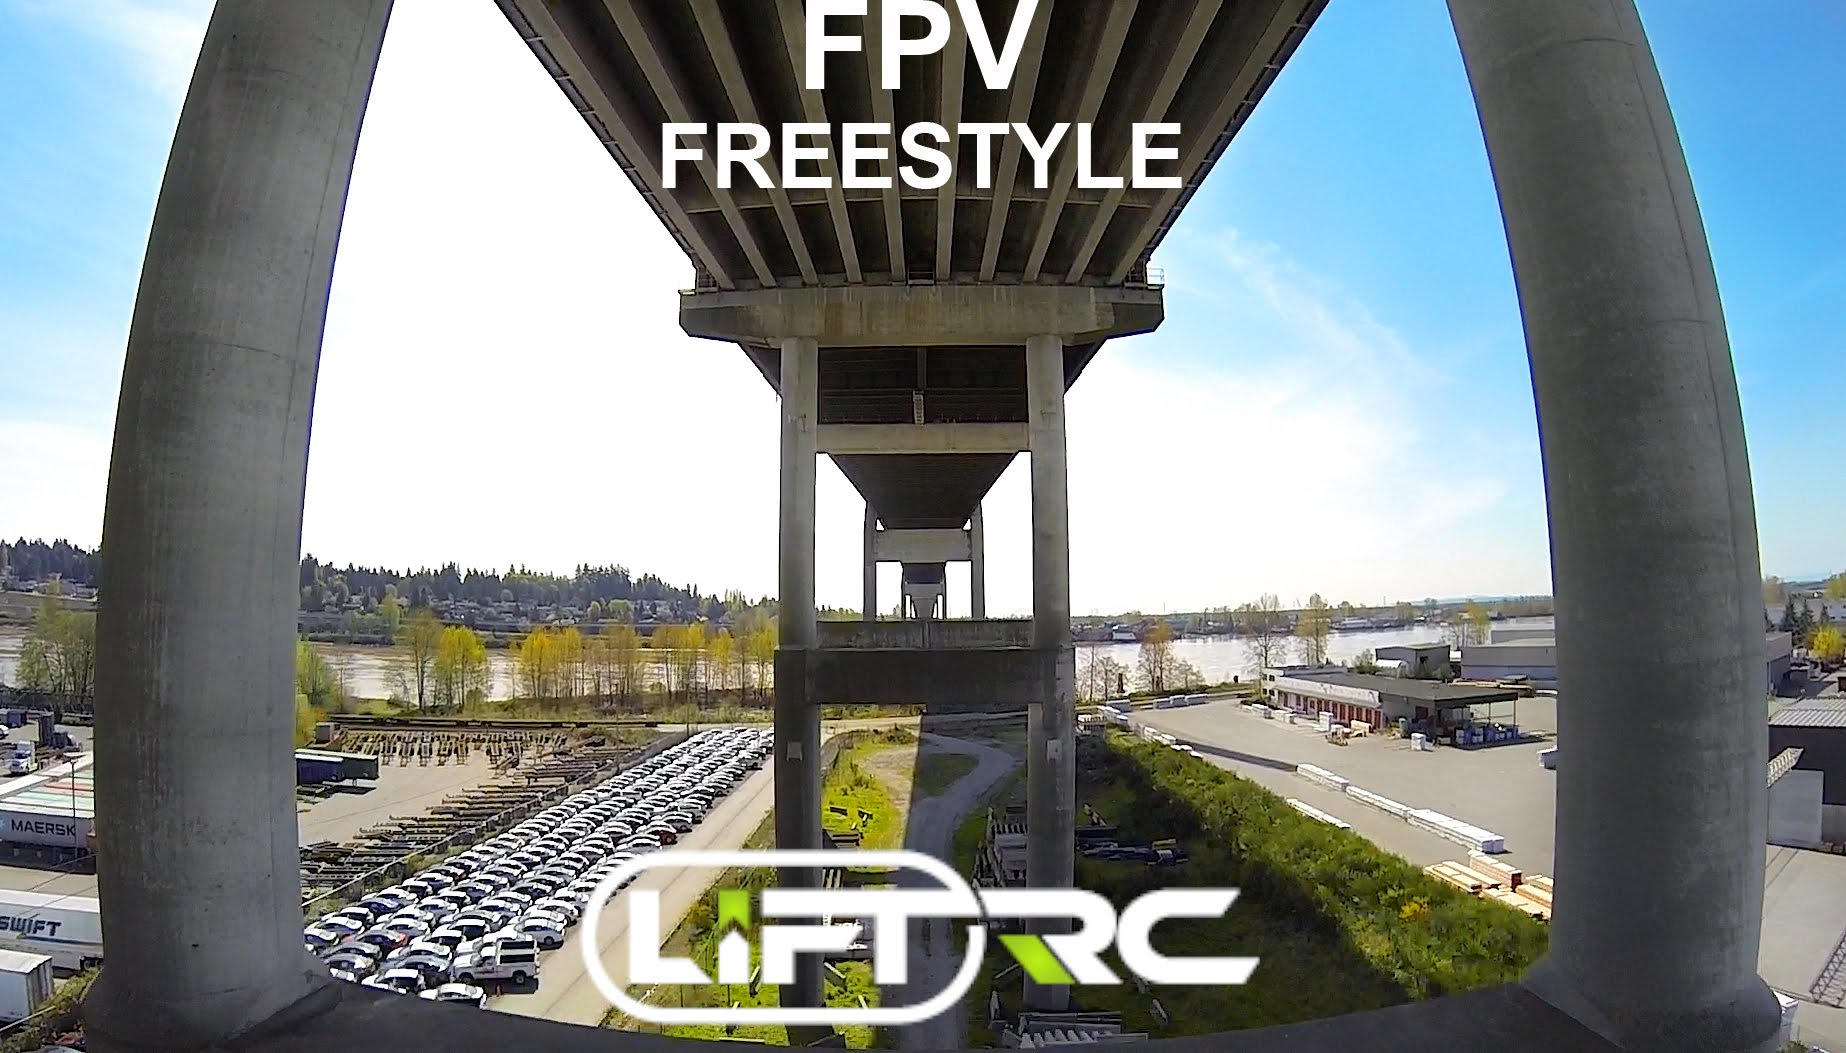 FPV FREESTYLE – DRONE RACING – FPV CANADA